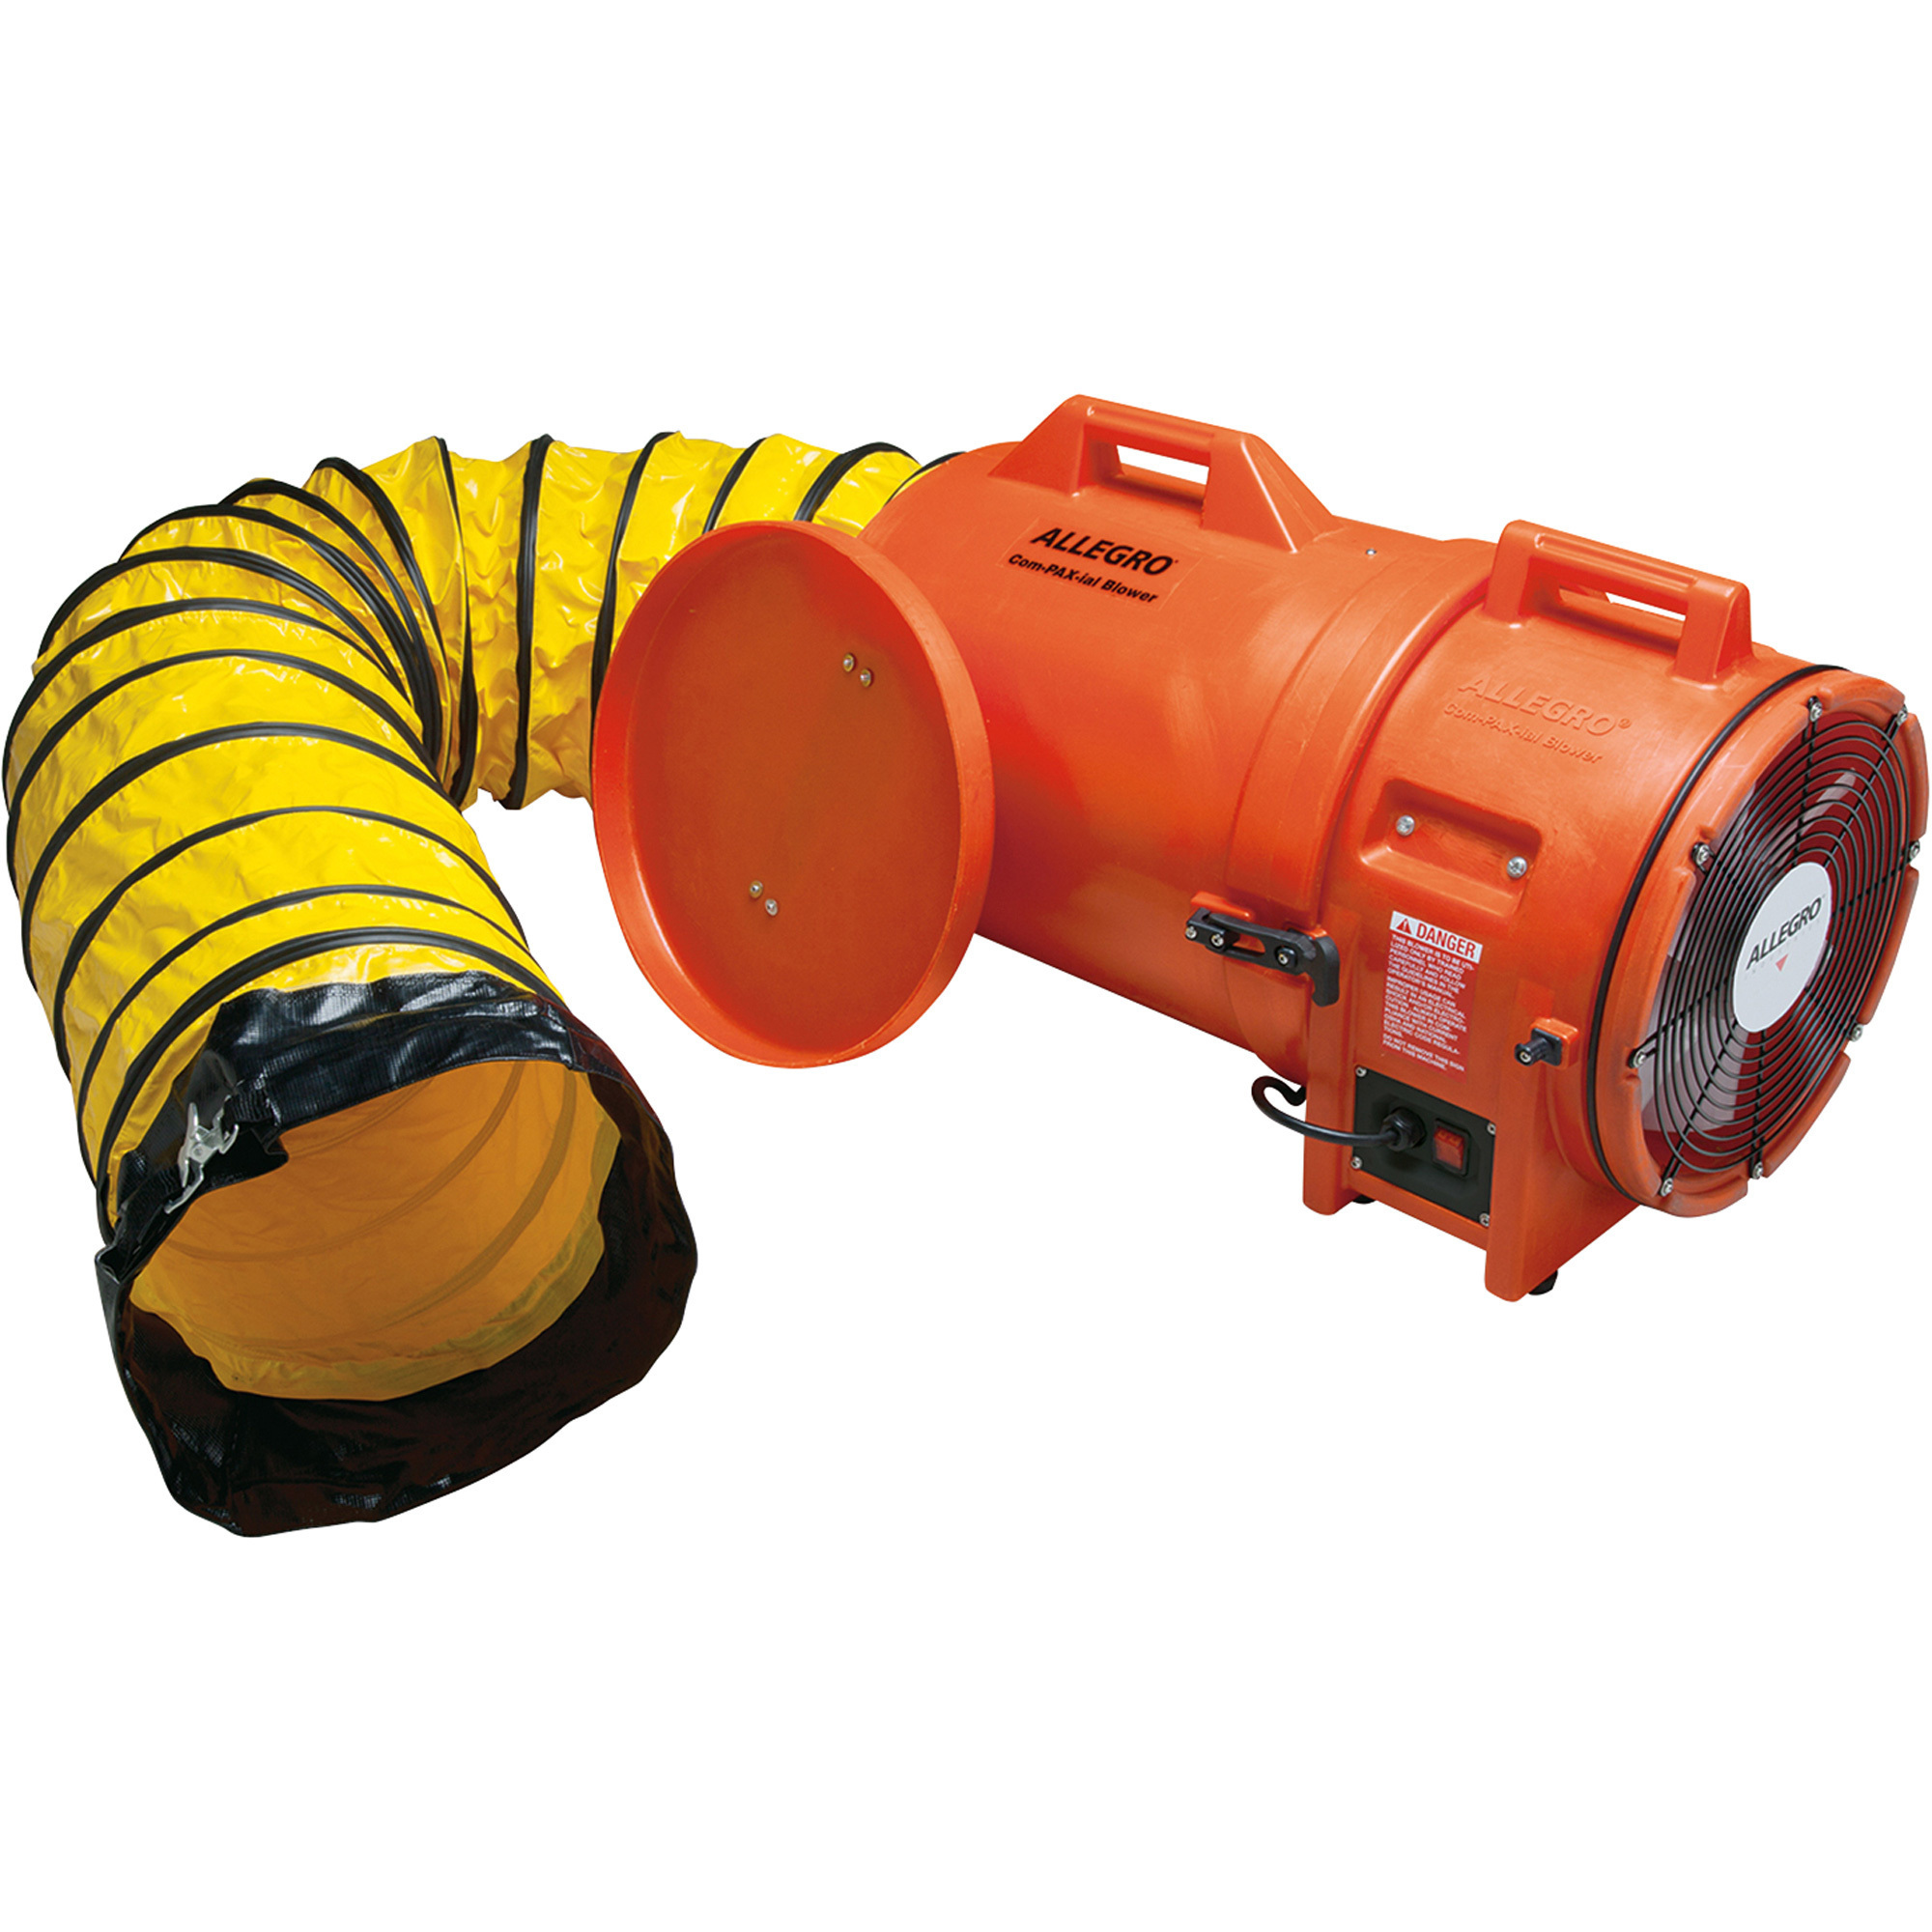 Allegro Plastic Compact Axial Blower,1842 CFM